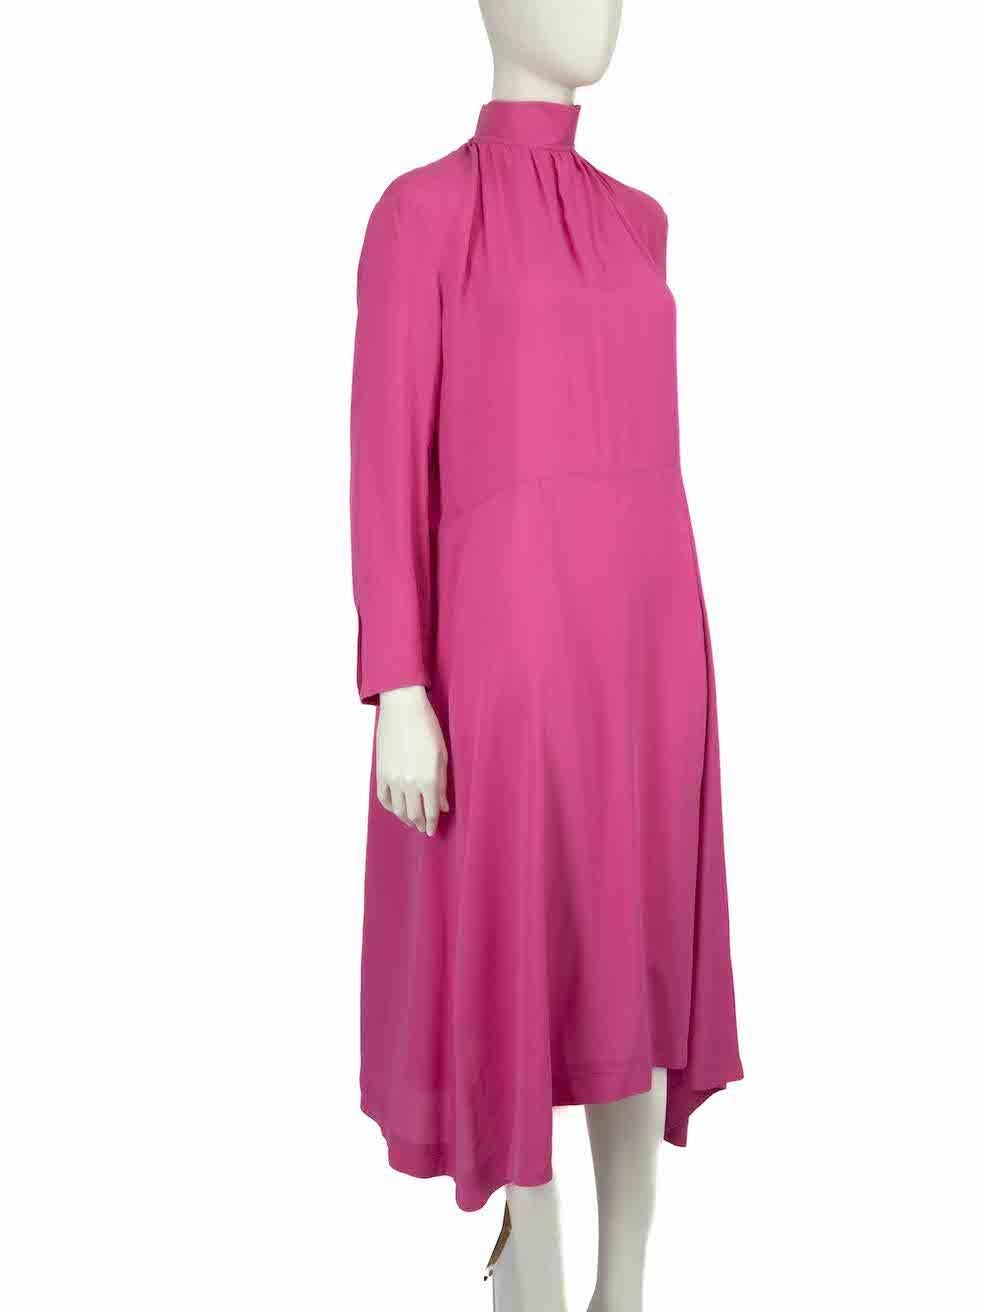 CONDITION is Very good. Minimal wear to dress is evident. Minimal discoloured marks to side hemline. Minimal loose thread on the right cuff on this used Balenciaga designer resale item.
 
 
 
 Details
 
 
 Pink
 
 Silk
 
 Dress
 
 Mock neck
 
 Midi
